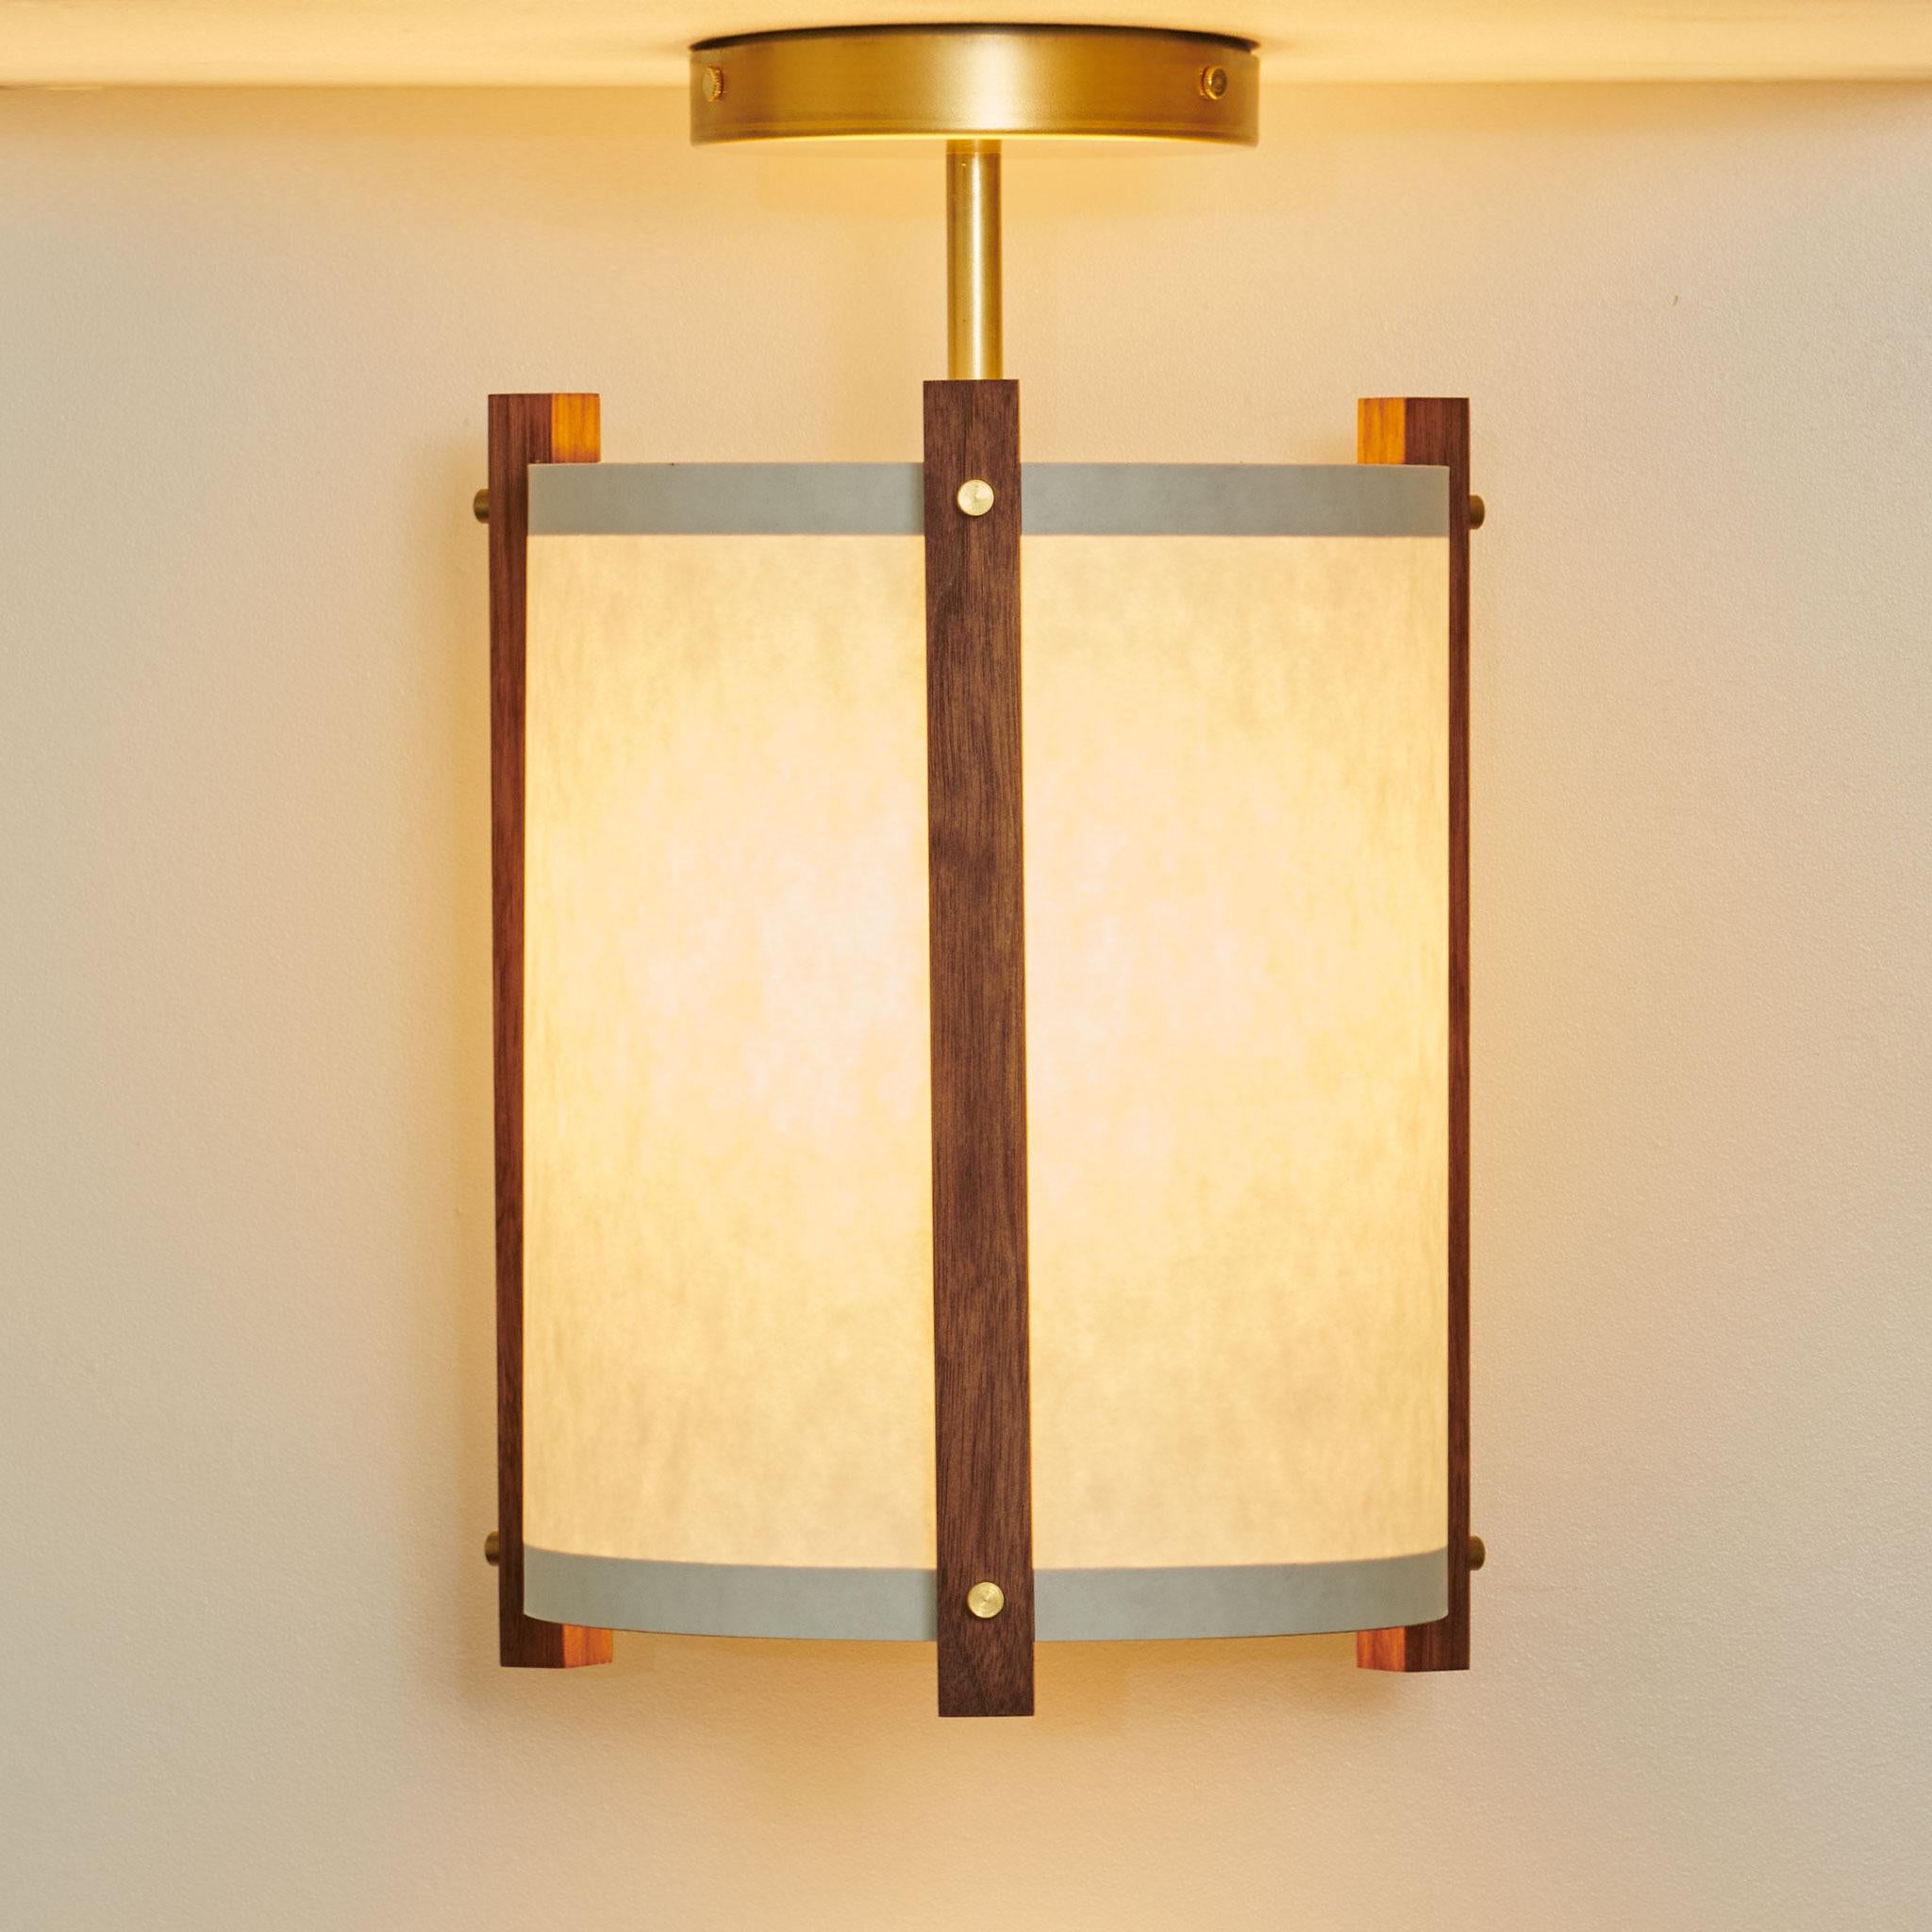 This simple, small modern design adds an element of sculpture to your room while the brass accents and paper shade brings a soft glow to any space. These pendants are equally beautiful off during the day as well as illuminated in the evening.

The